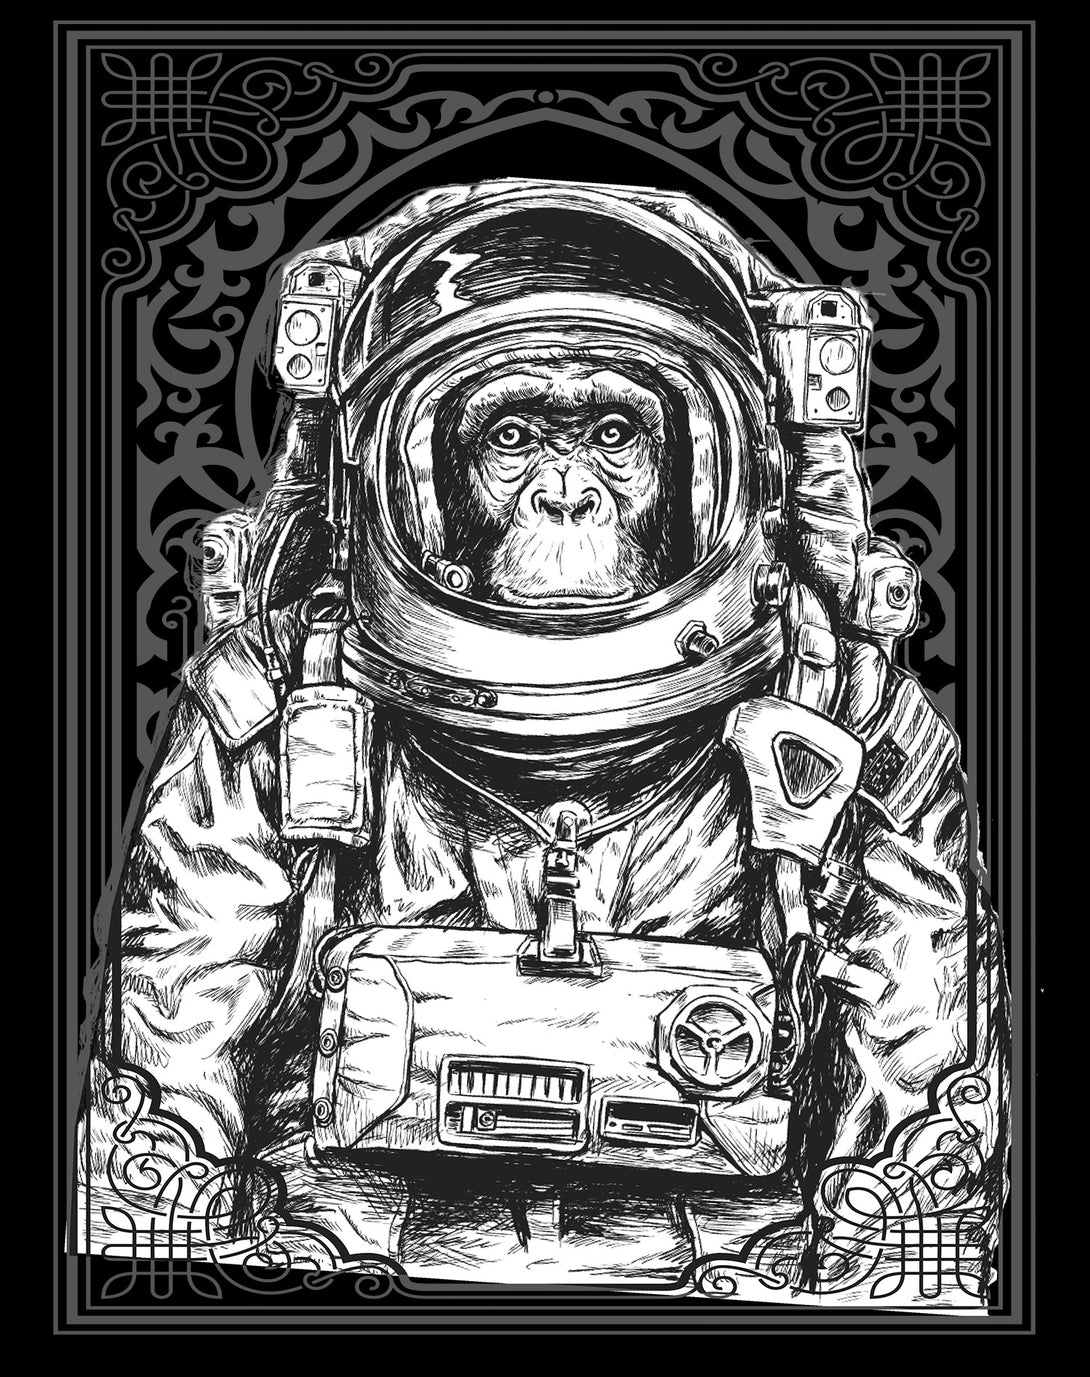 Science Space Monkey Astronaut Launch Nerdy Geek Chic Ironic Official Women's T-shirt Black - Urban Species Design Close Up